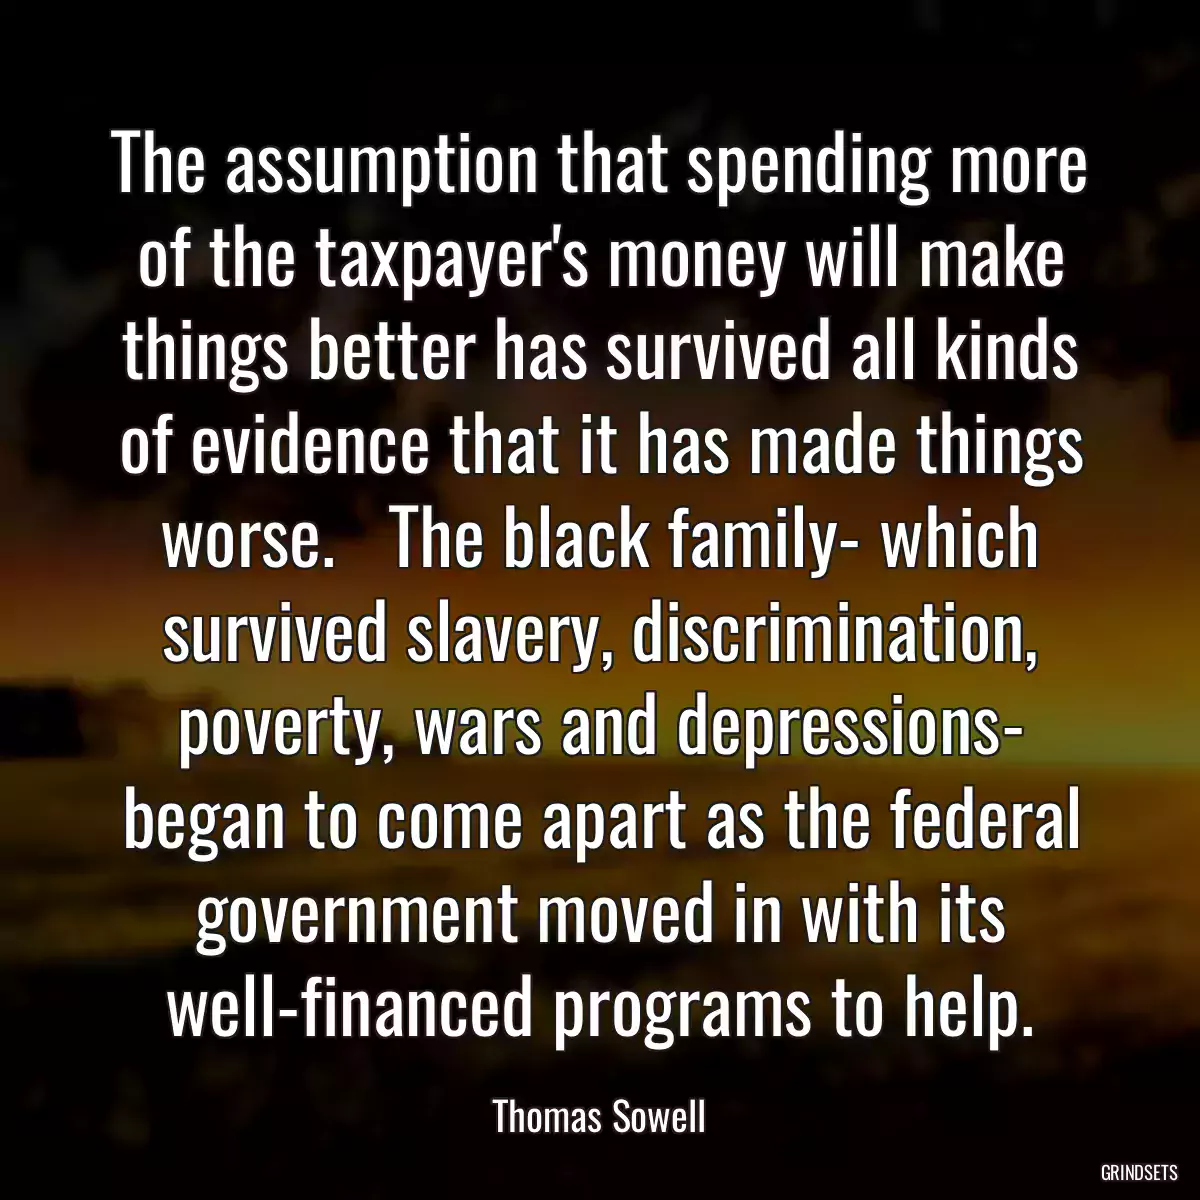 The assumption that spending more of the taxpayer\'s money will make things better has survived all kinds of evidence that it has made things worse.   The black family- which survived slavery, discrimination, poverty, wars and depressions- began to come apart as the federal government moved in with its well-financed programs to help.